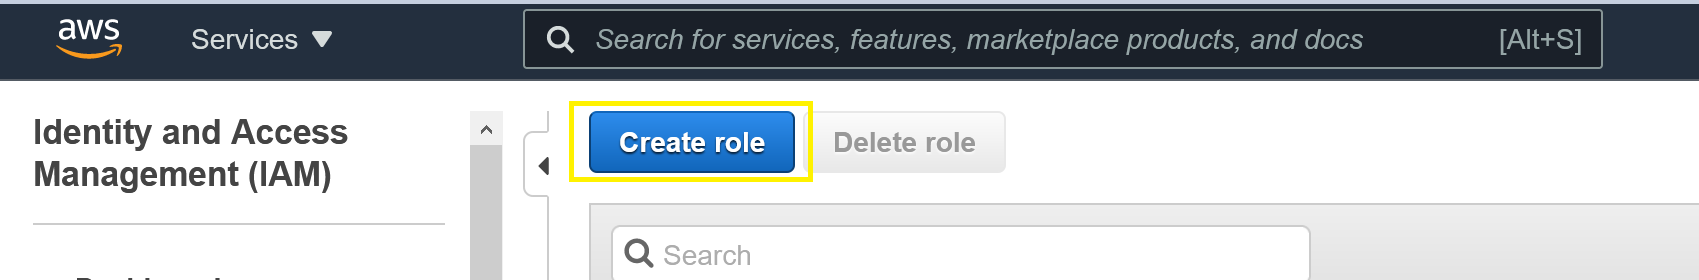 Roles section of the IAM console showing Create Role selection.